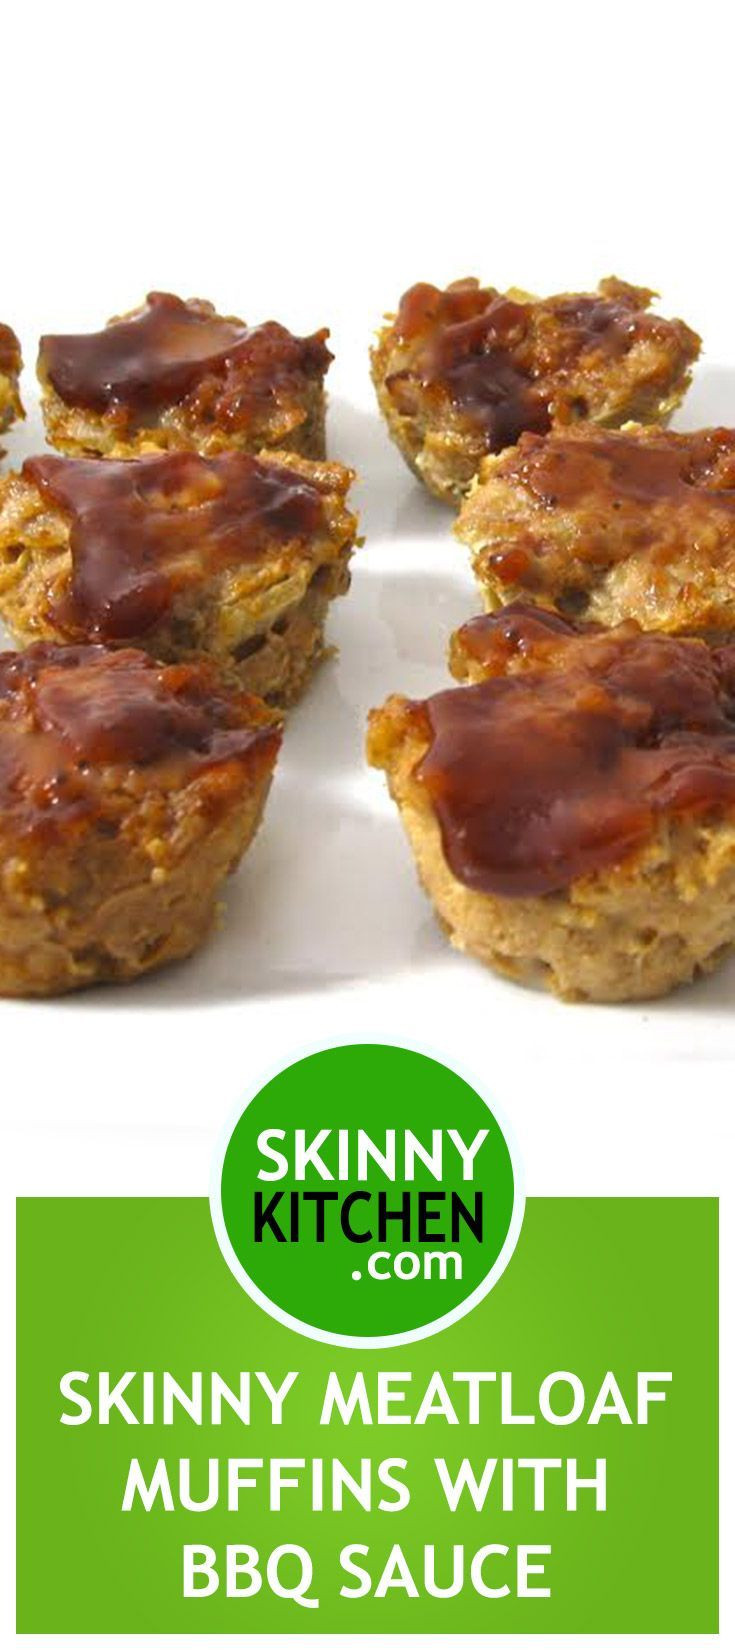 Weight Watchers Meatloaf Muffins
 Pin on Skinny Kitchen Meatloaf